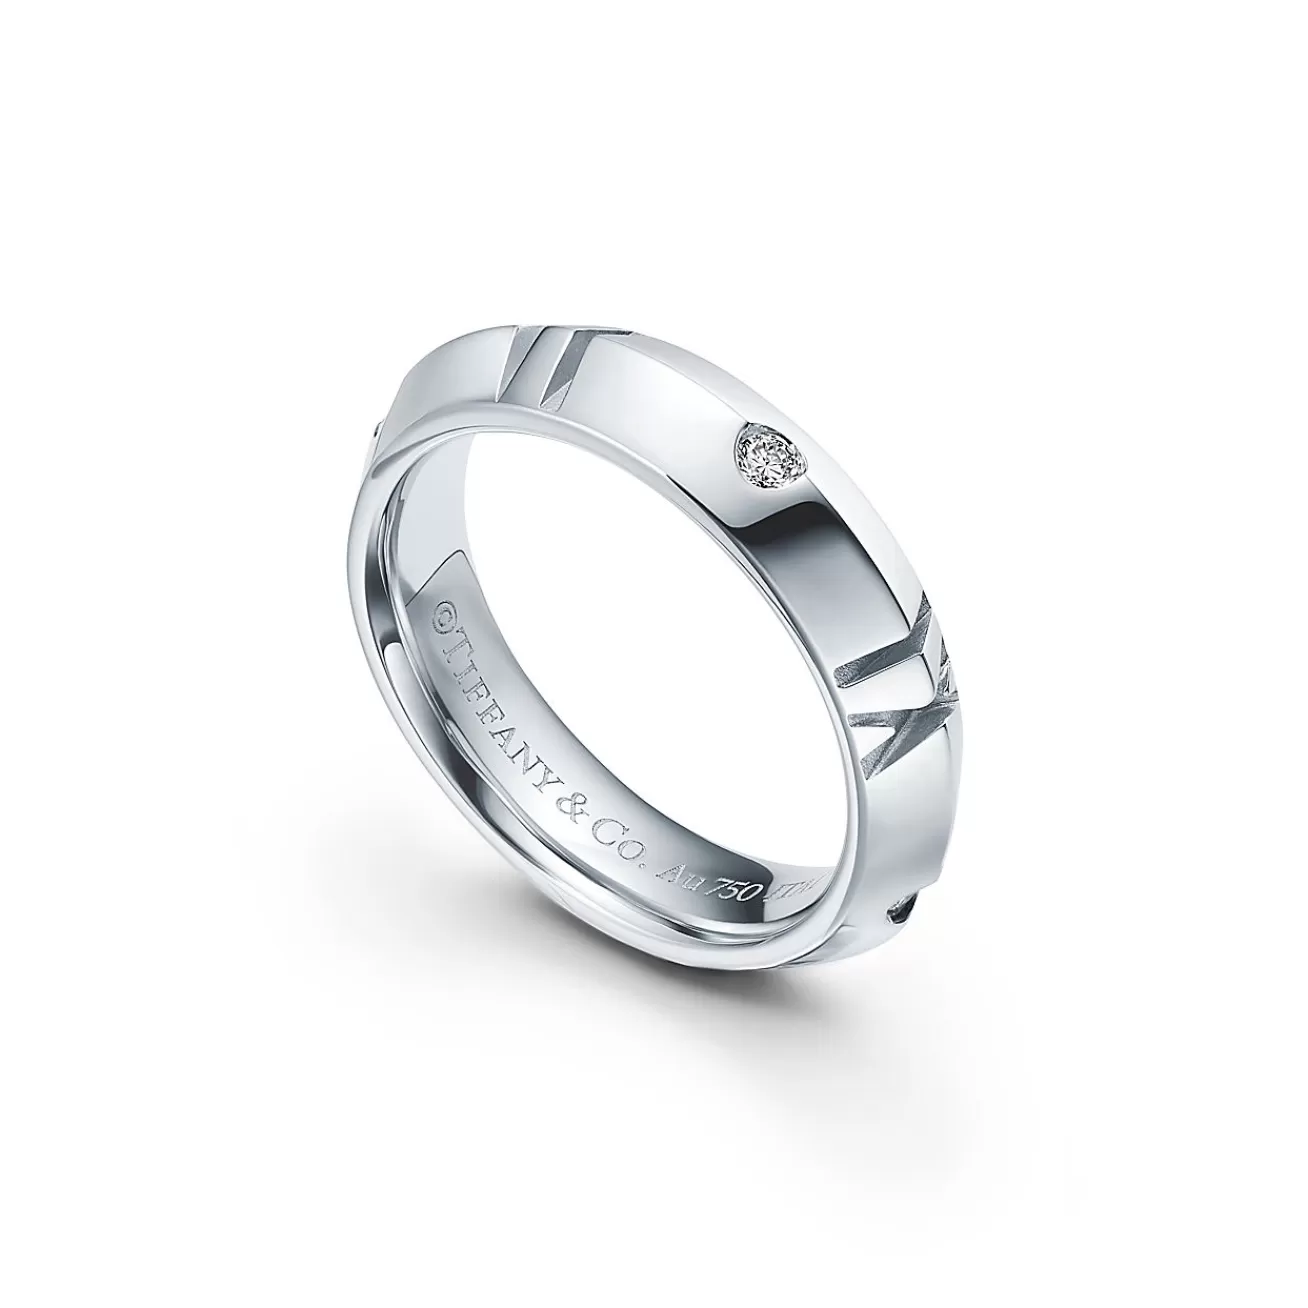 Tiffany & Co. Atlas® X Closed Narrow Ring in White Gold with Diamonds, 4.5 mm Wide | ^ Rings | Men's Jewelry